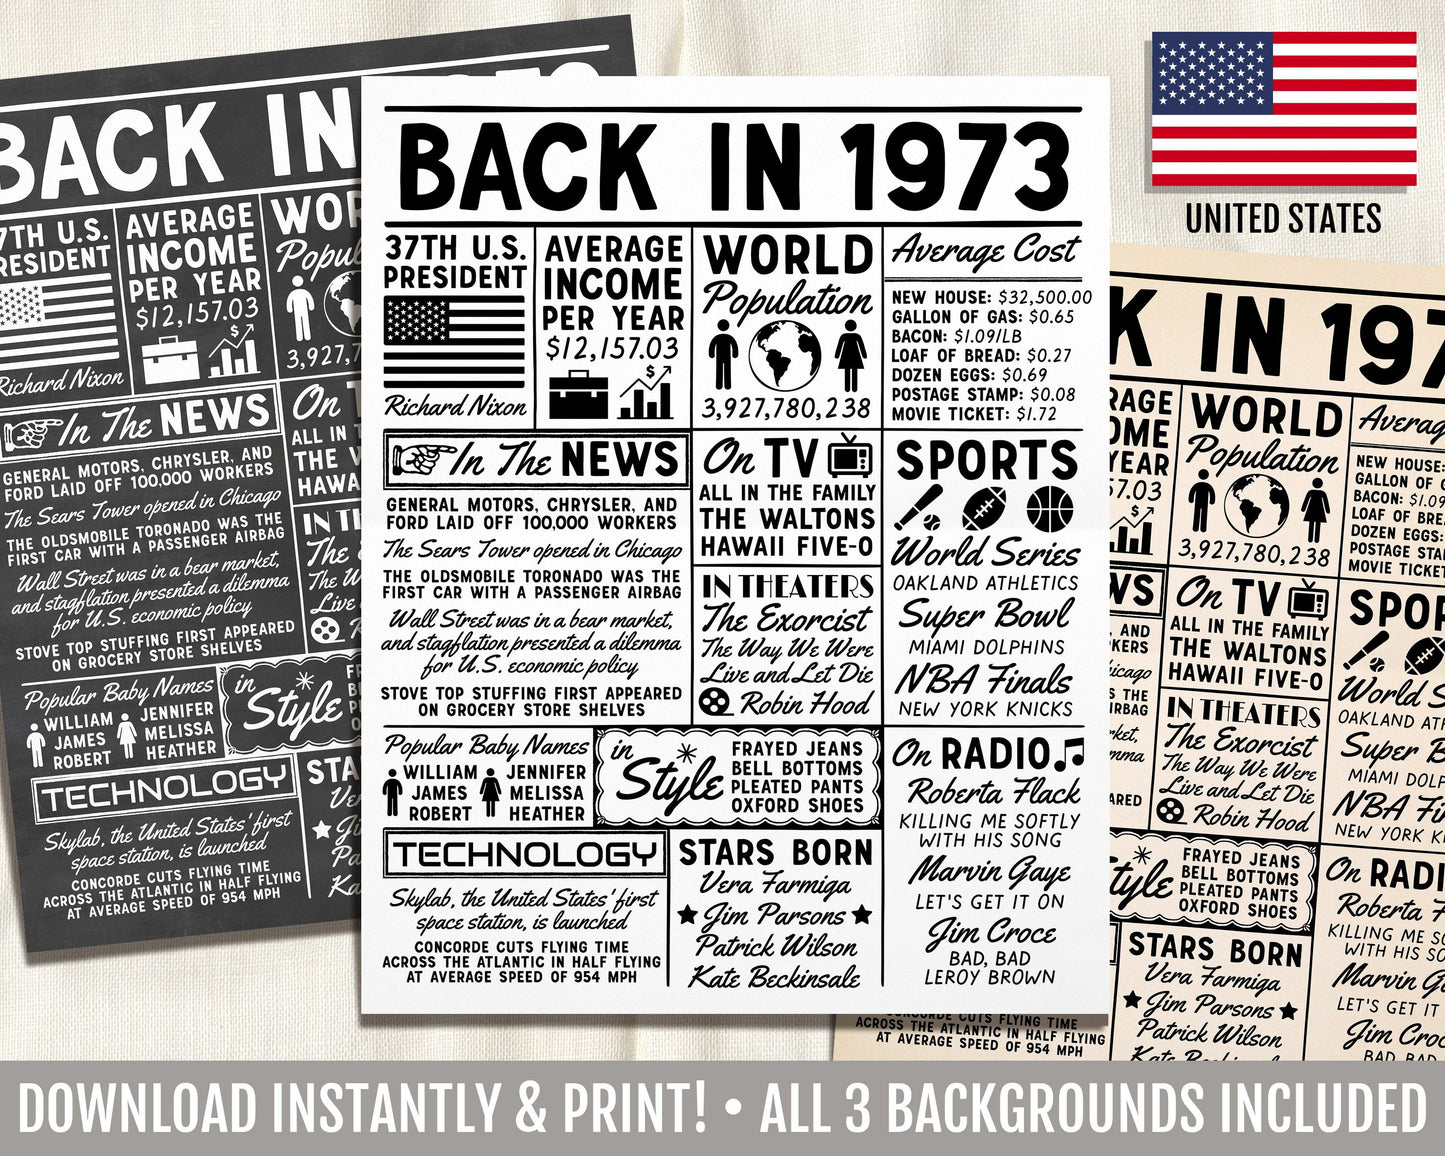 Back in 1973 DIGITAL Sign Printable, 70s Time Capsule, Born in 1973, Vintage Chalkboard Newspaper Fun Facts Poster For Birthday Anniversary